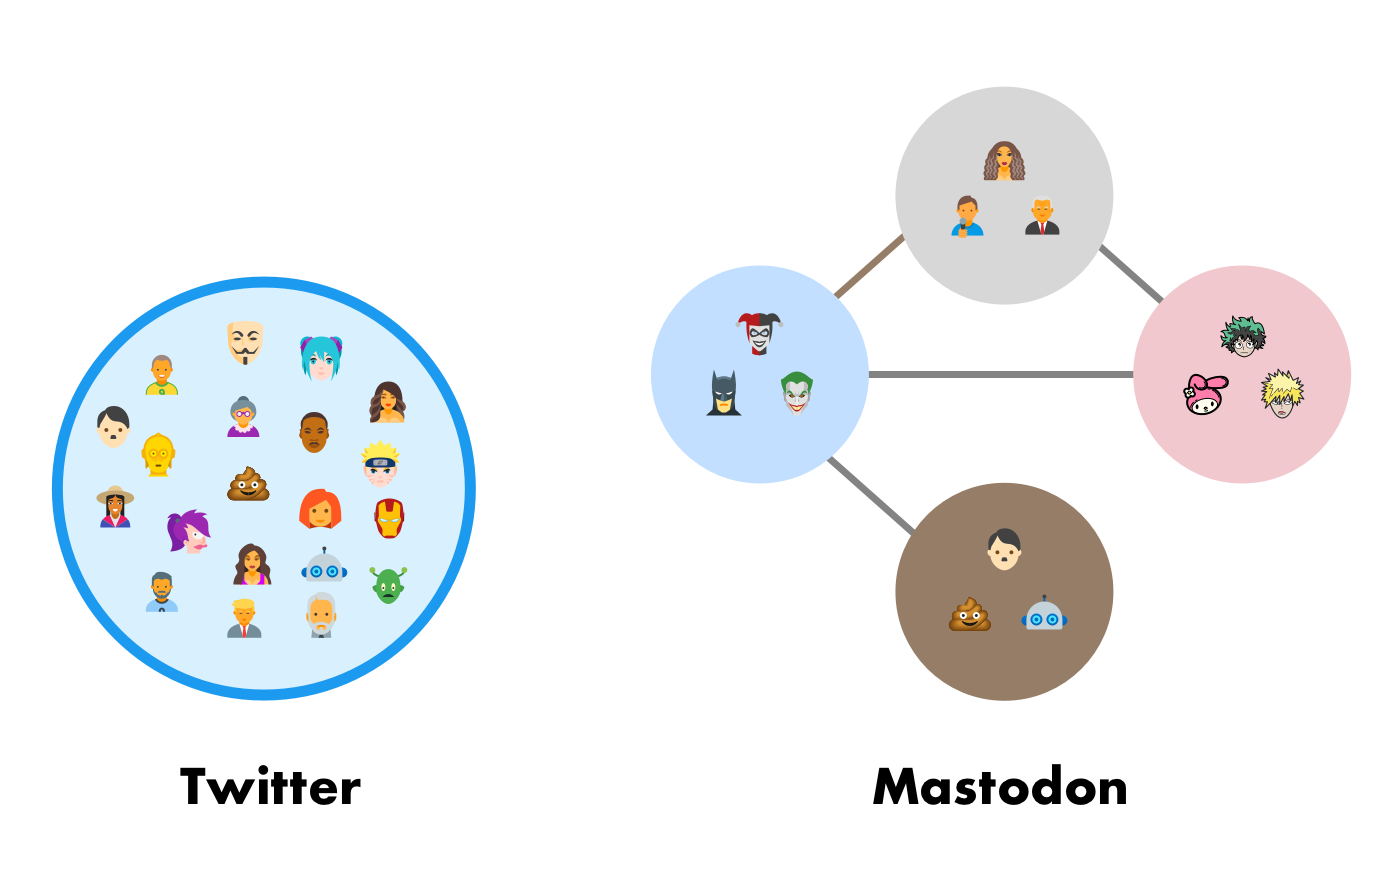 Comparison diagram of Twitter vs Mastodon. Twitter is one circle full of people, Mastodon is several connected servers.